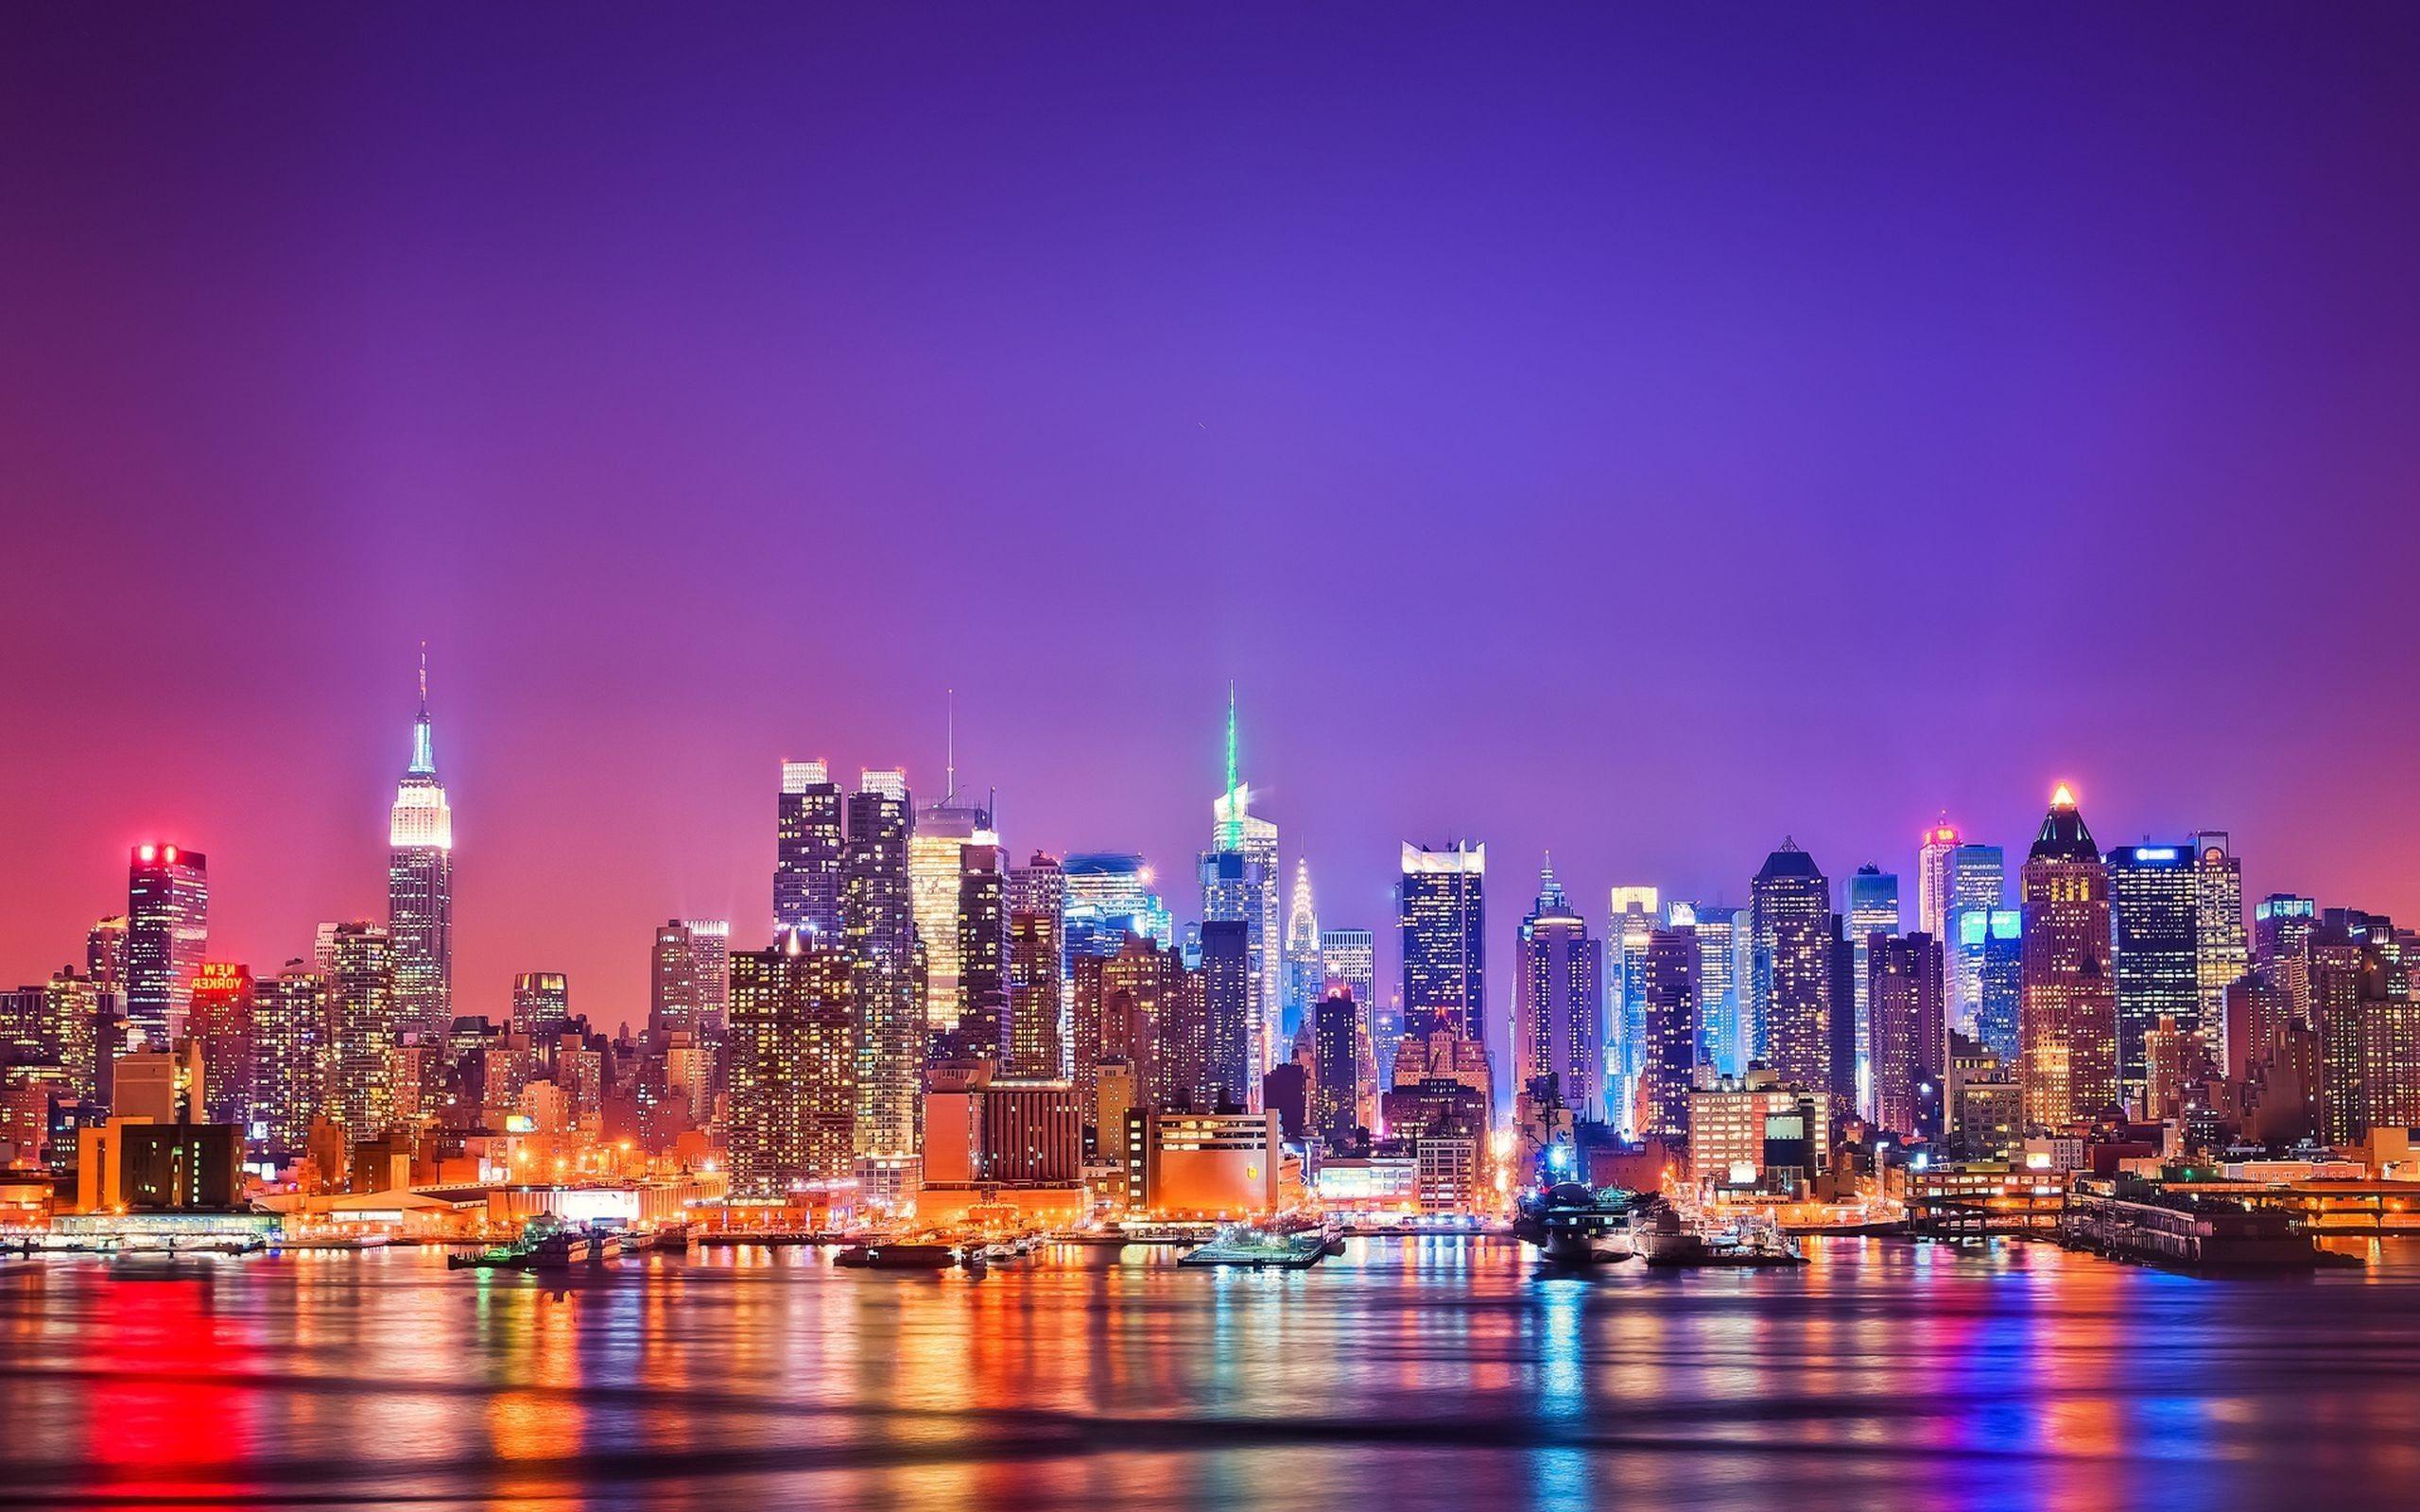 Intriguing Download Free New York City Wallpaper X Px York City To